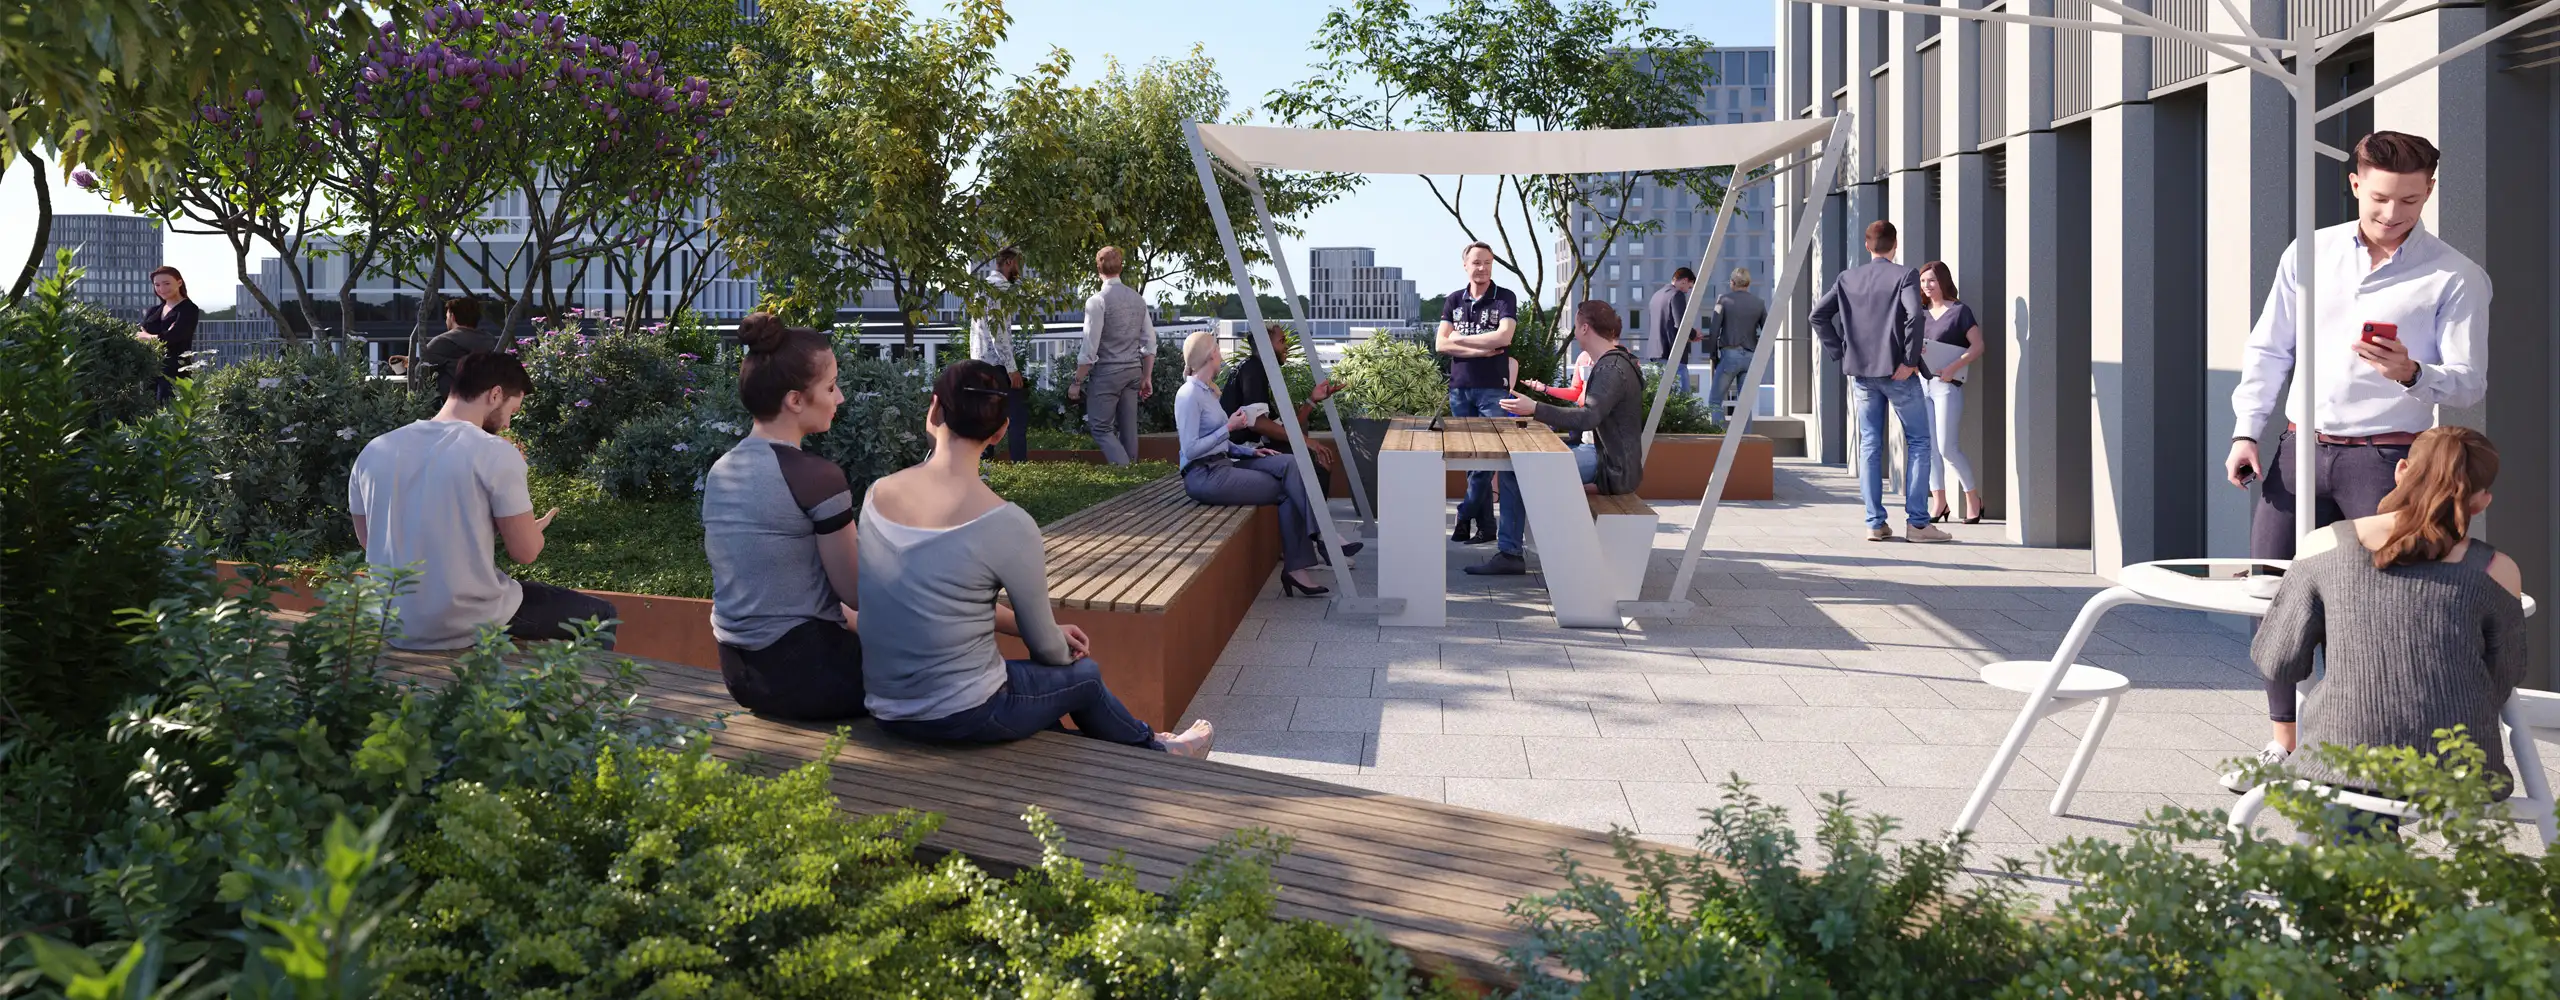 Image: Rendering of a terrace scene with various 3DPEOPLE in it.